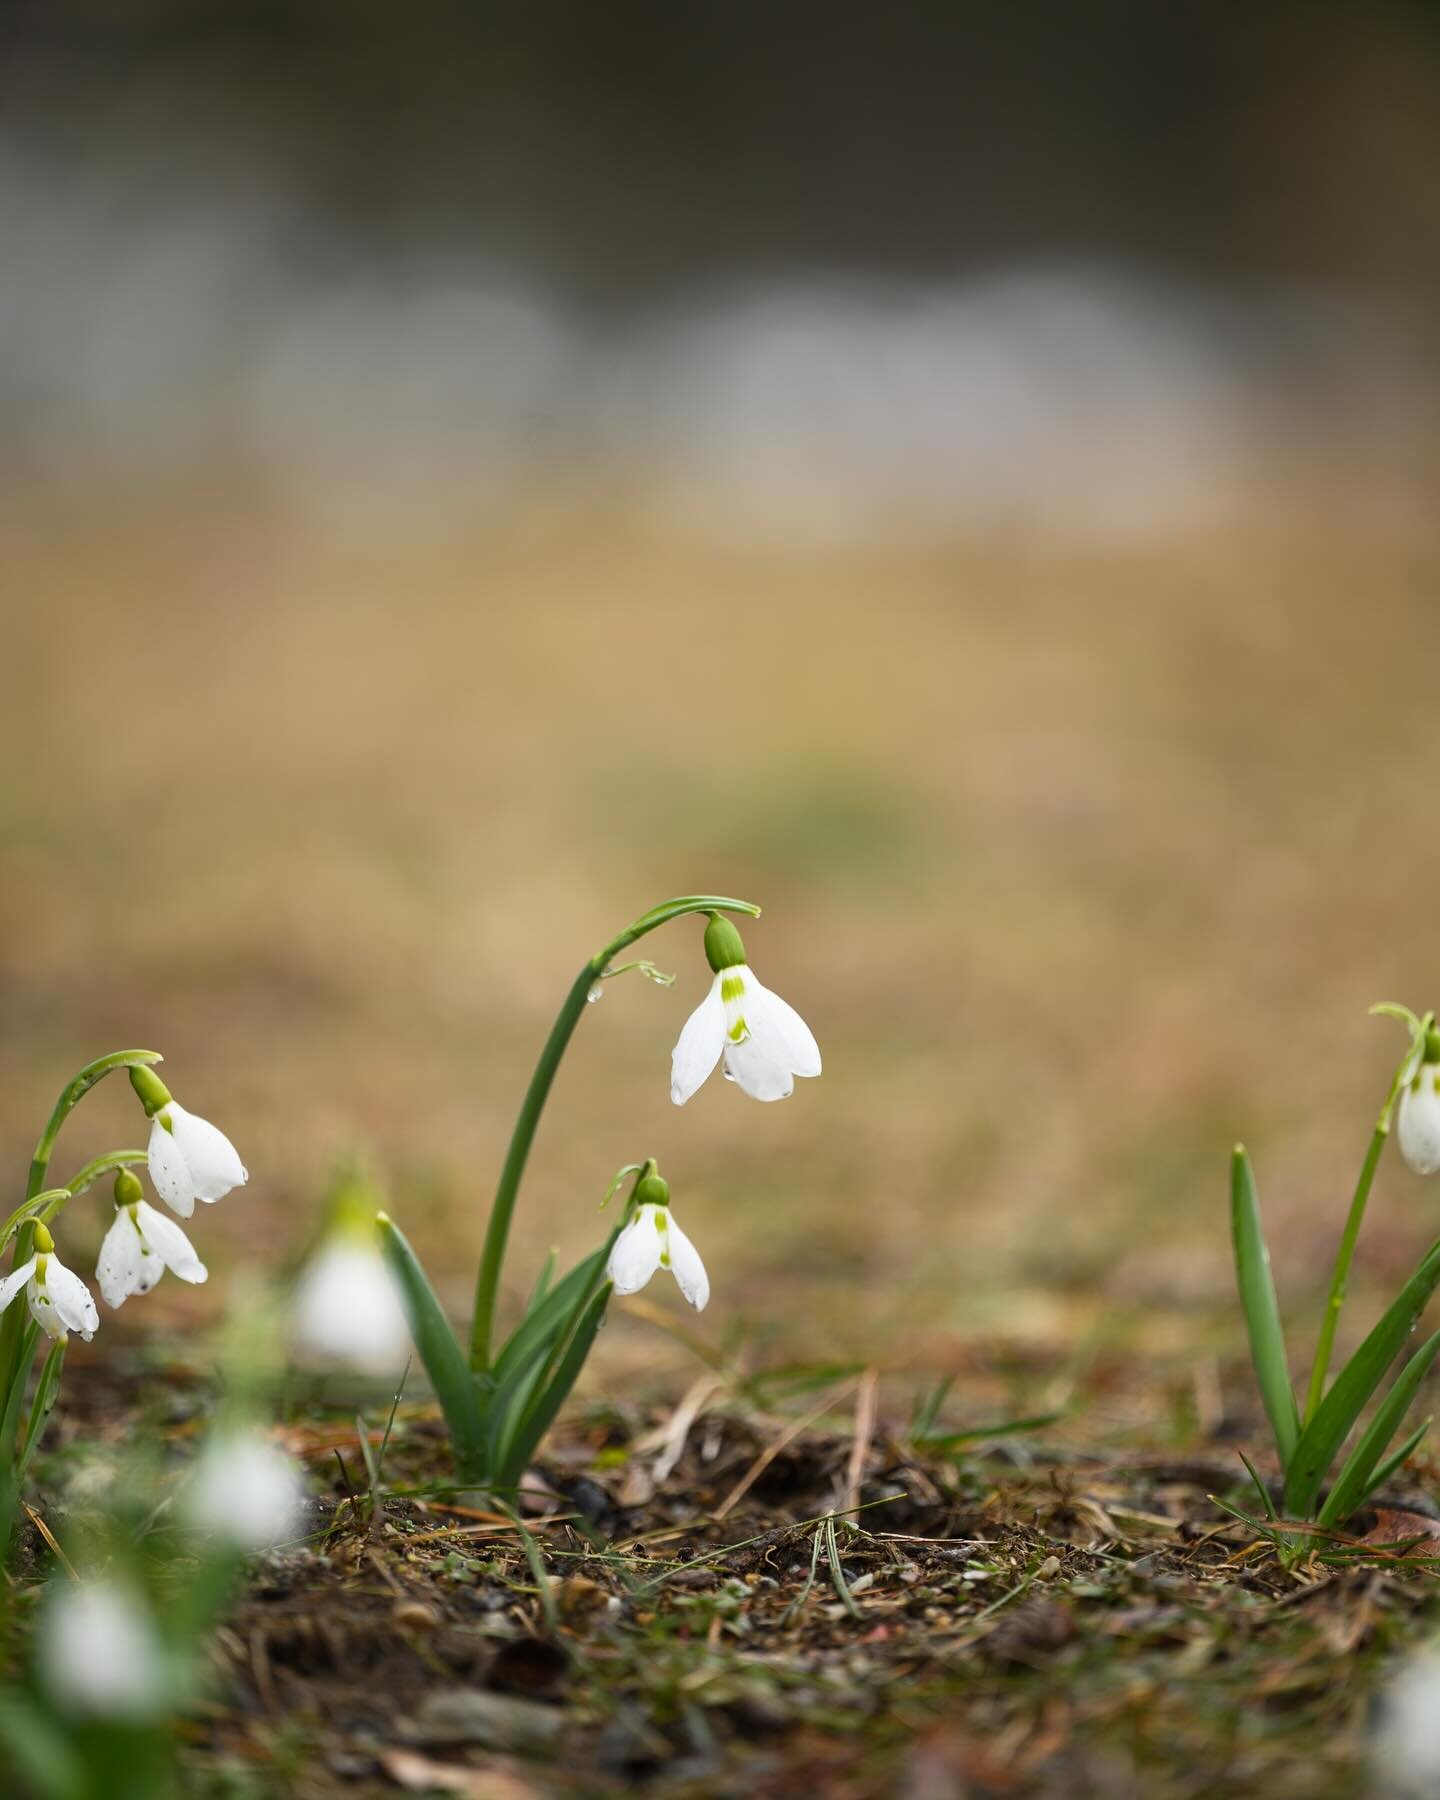 The sweetest little pockets of Spring popped up this week&hellip;crocuses and snowdrops. I love how we are all connecting harbingers of spring in our gardens on Instagram. 

Happy Spring!!
🌿🌿🌿🌿

#tahillafarm
#springflowers 
#seasonspoetry
#kimkla